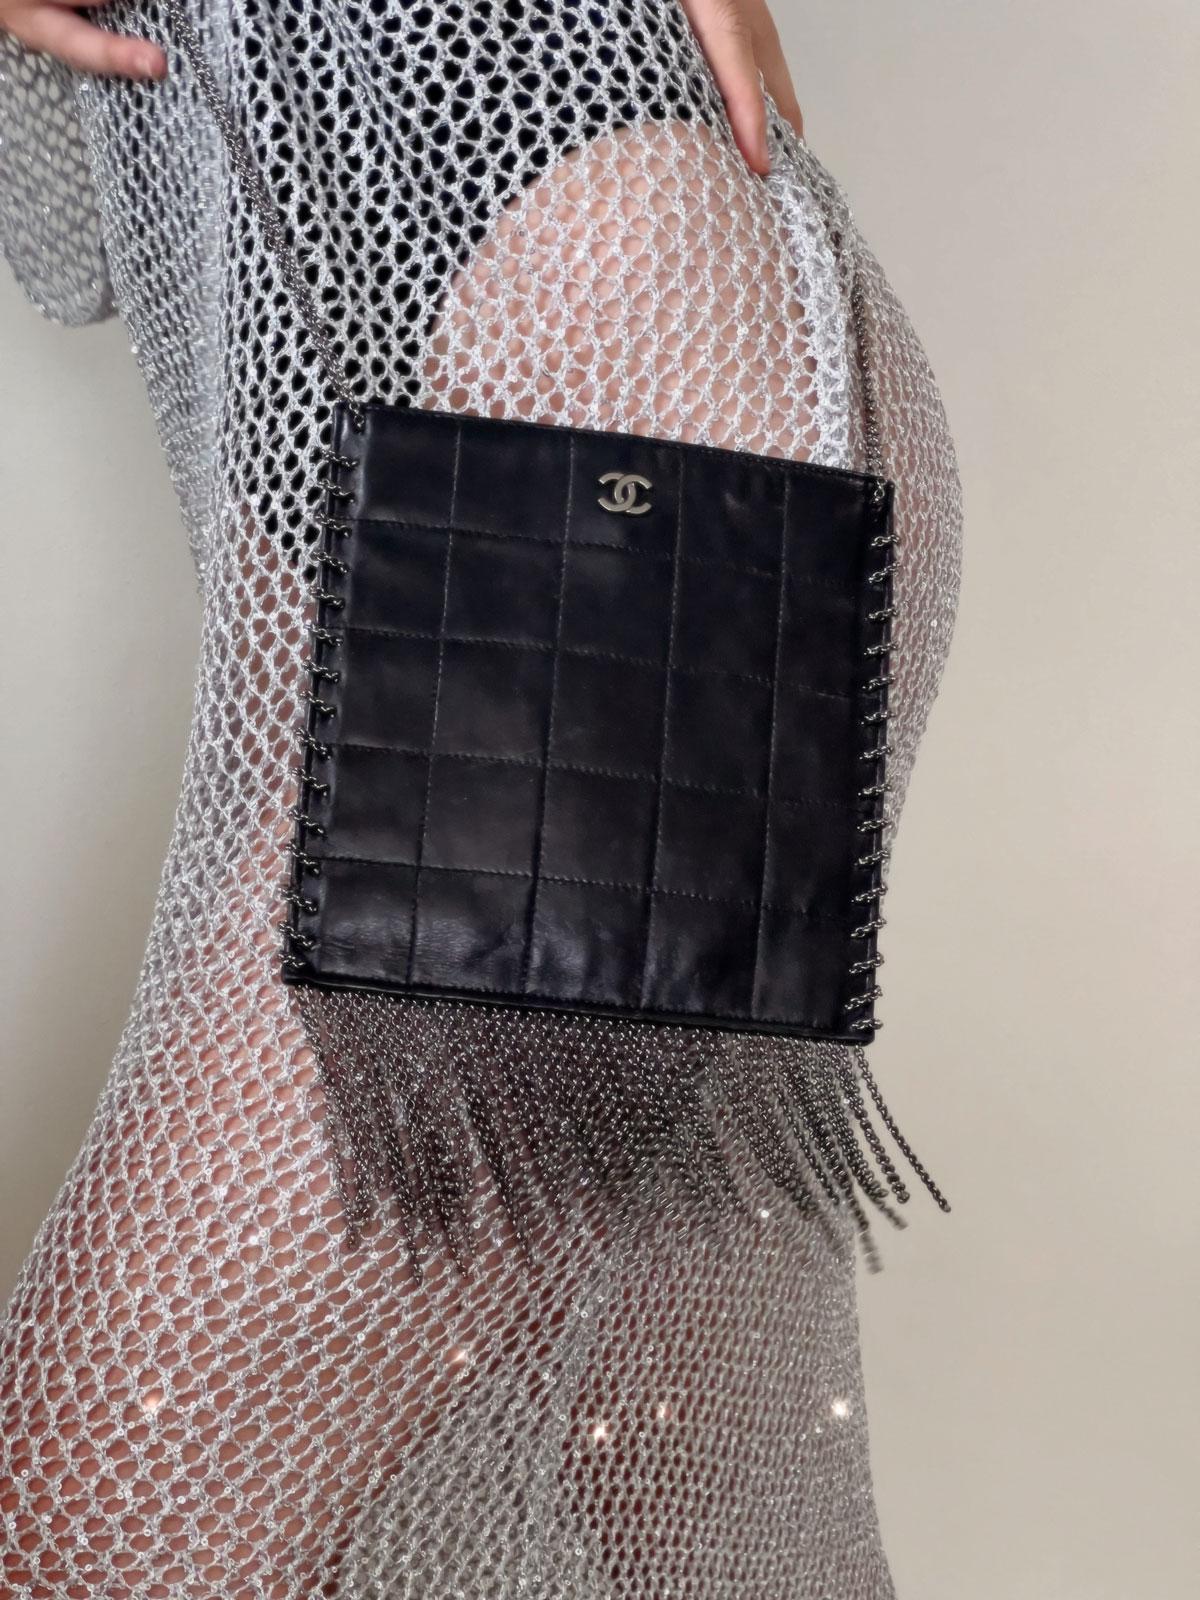 Chanel 2002 Vintage Edgy Punk Fringe Chain Quilted Mini Tote Crossbody Bag

Year: 2002-2003 {Vintage 22 Years}

Silver hardware
Square quilted lambskin
Nylon printed microfiber interior
Main interior zippered compartment
7